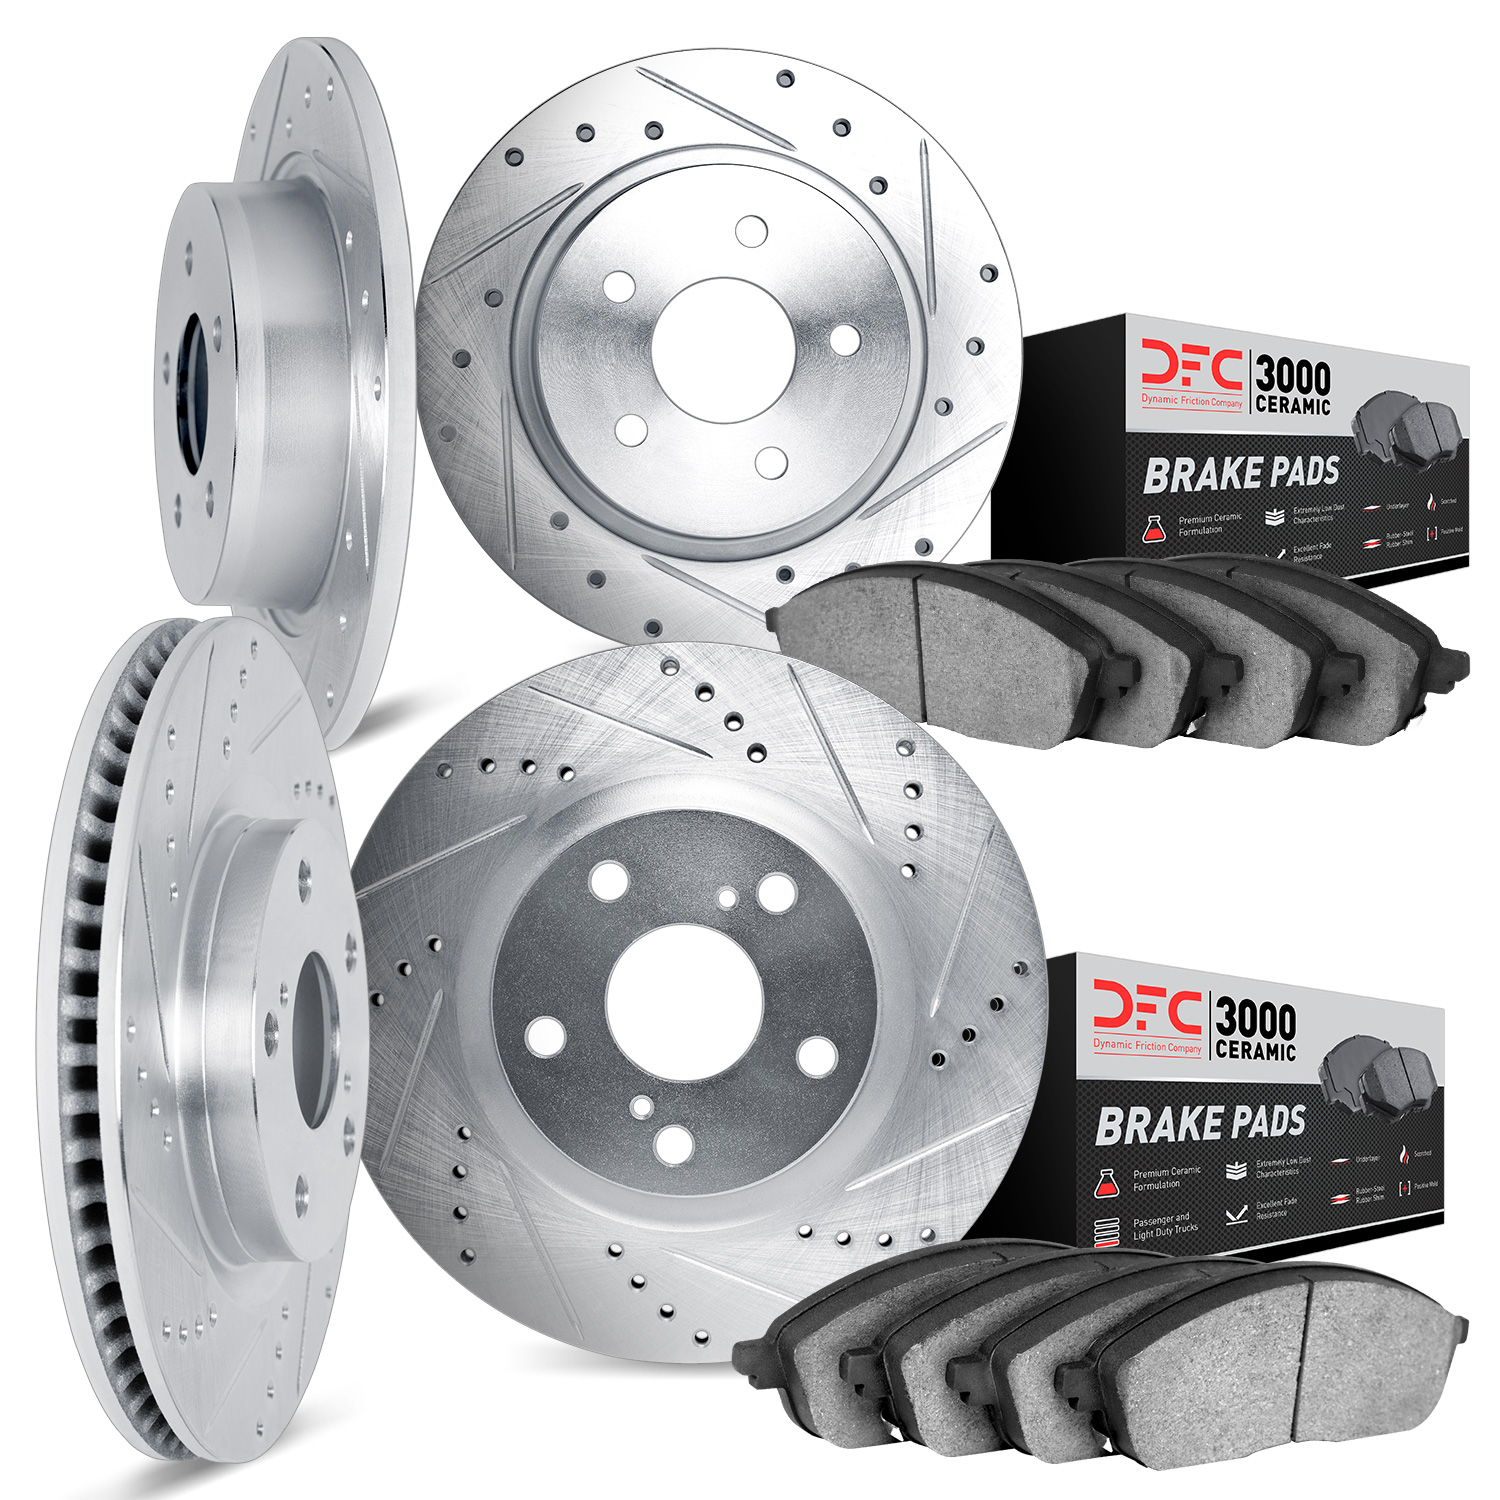 7304-76070 Drilled/Slotted Brake Rotor with 3000-Series Ceramic Brake Pads Kit [Silver], 2004-2009 Lexus/Toyota/Scion, Position: